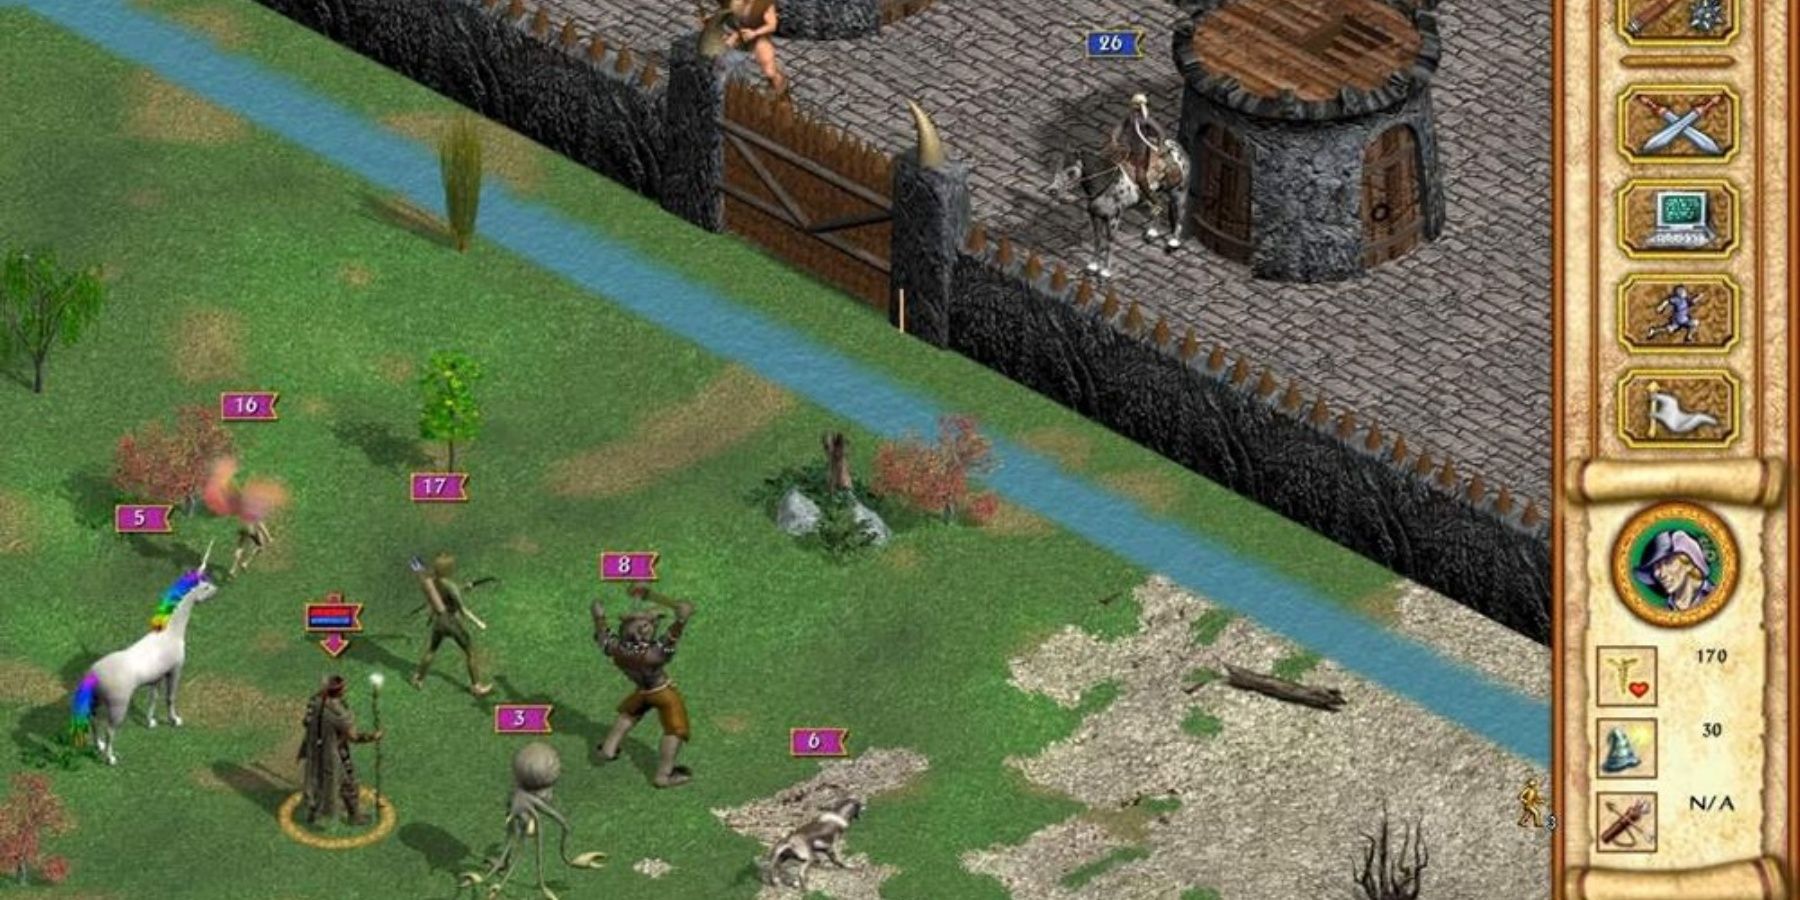 Heroes of Might and Magic 4 gameplay